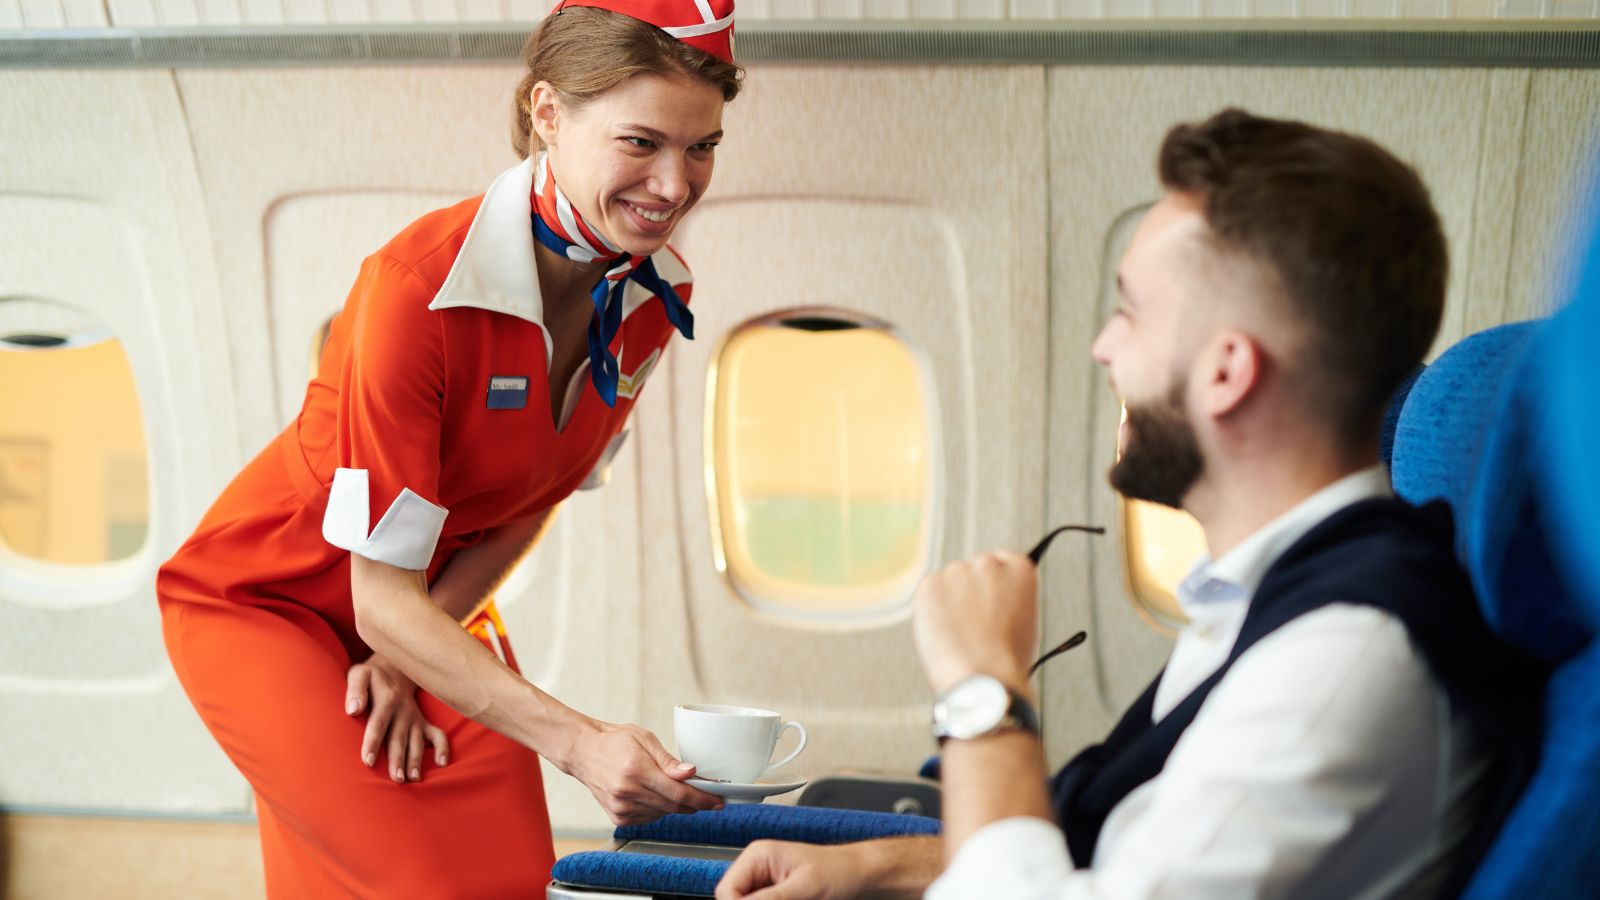 <span>Regarding passenger safety and comfort, airline flight attendants are indispensable. They deal with passengers’ needs, maintain order in the cabin, handle emergencies, and mediate disputes. Competition, strict criteria, and demanding work circumstances like irregular work hours, long shifts, and frequent travel make it difficult for businesses to hire flight attendants.</span>